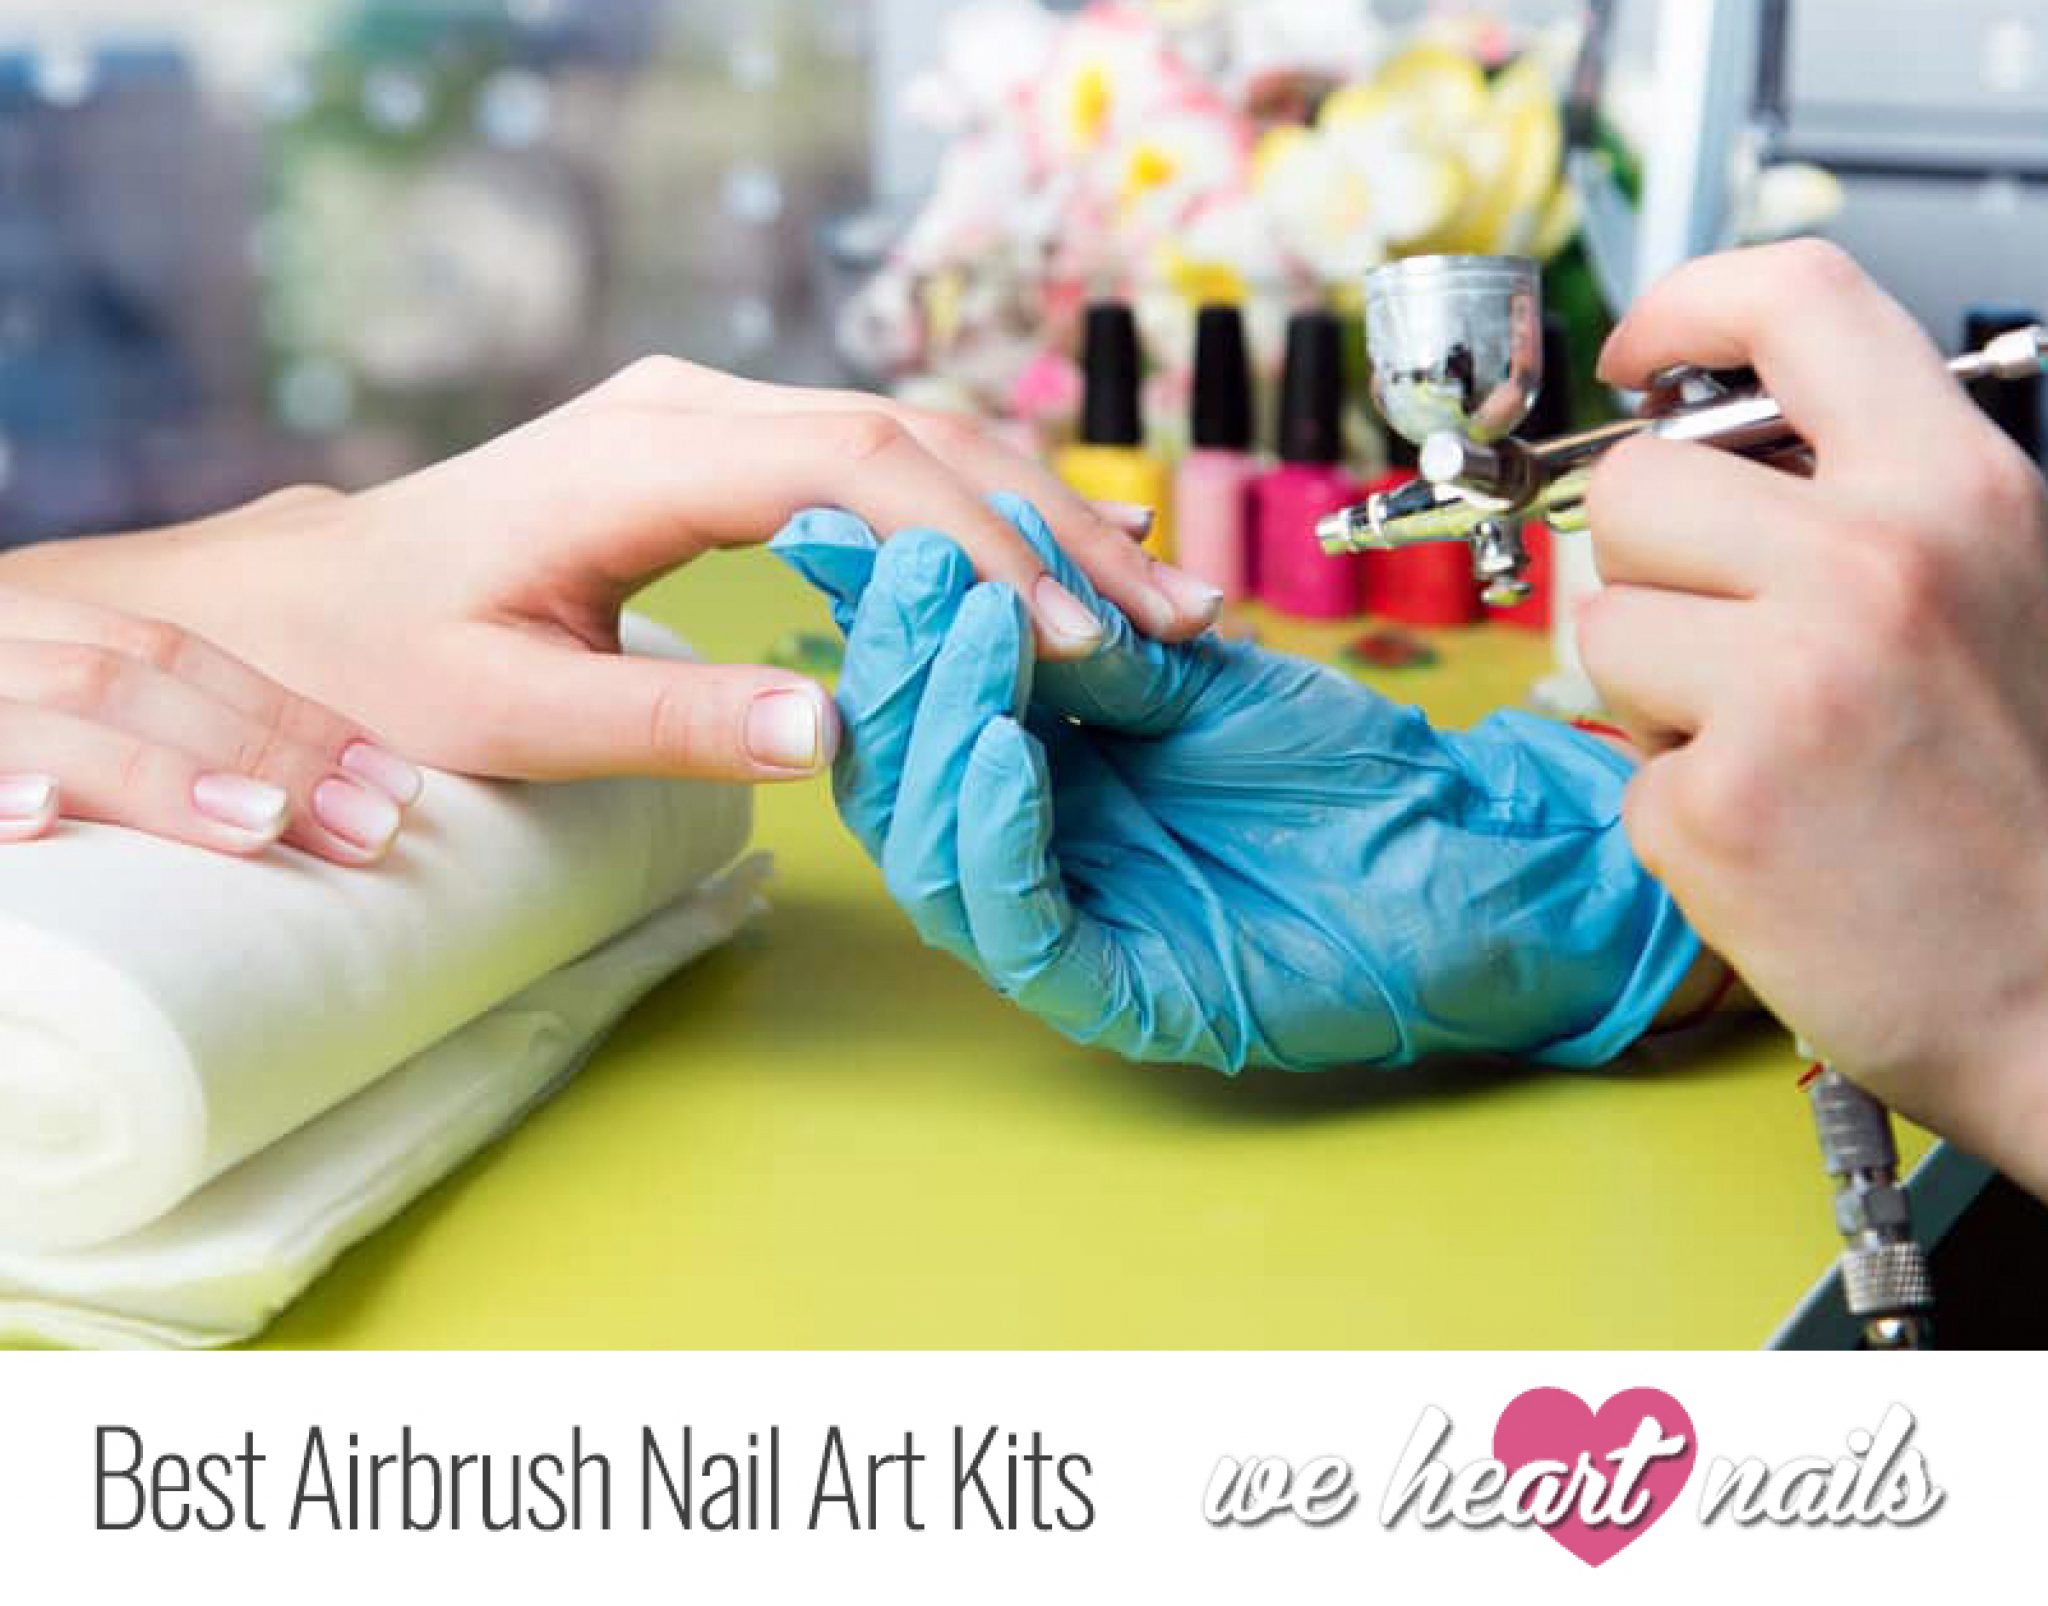 3. Mastering the Basics of Nail Art with an Airbrush - wide 3